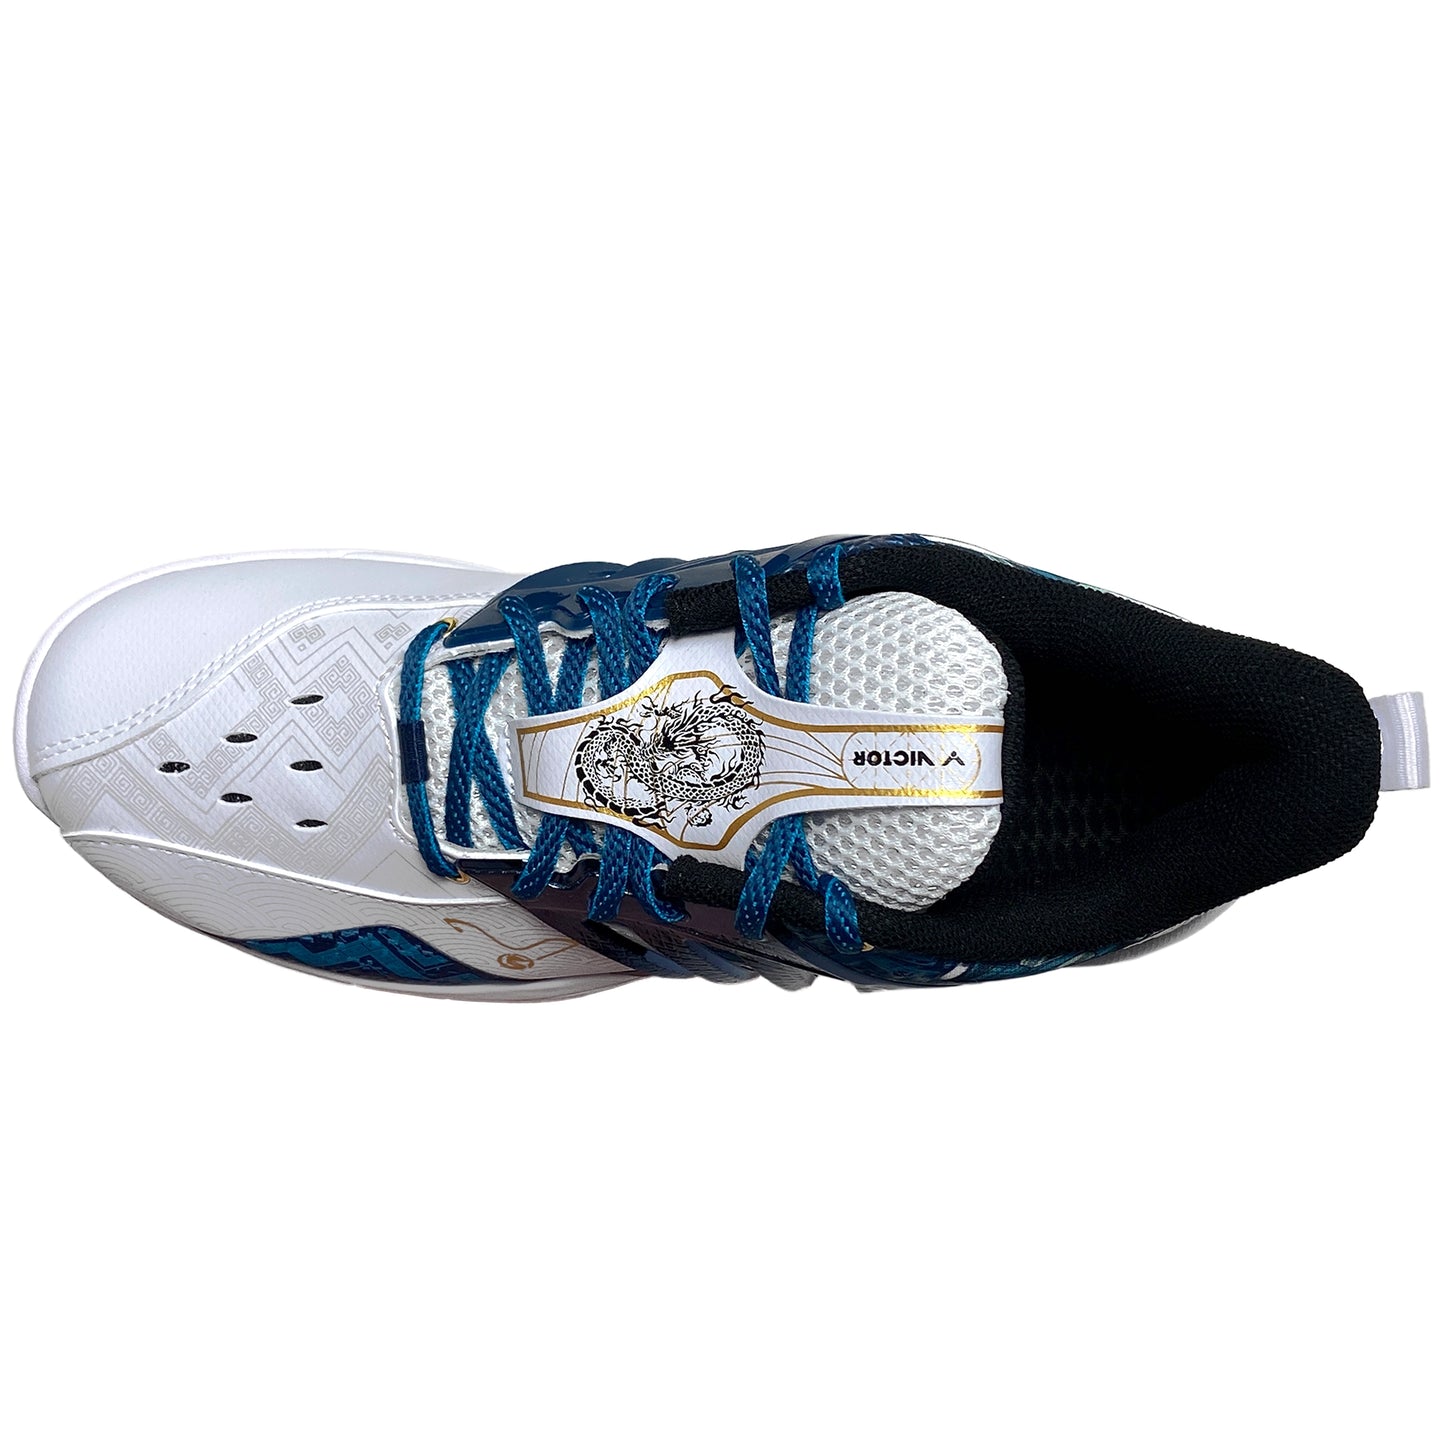 Victor Indoor Homme Édition CNY A790CNY-EX AB Blanc/Bleu